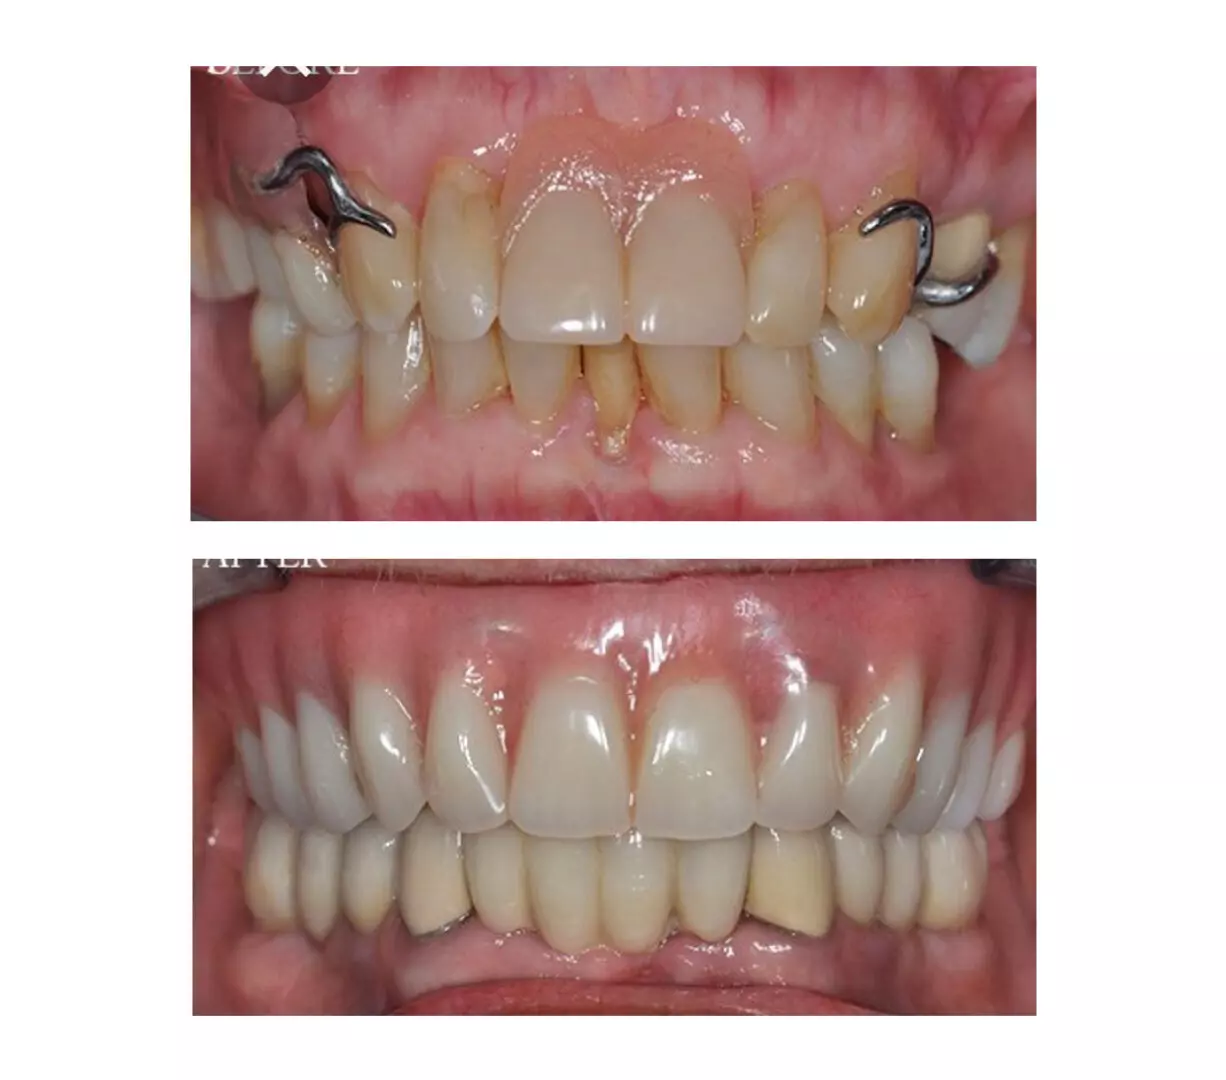 Before and after photos of our dental procedure